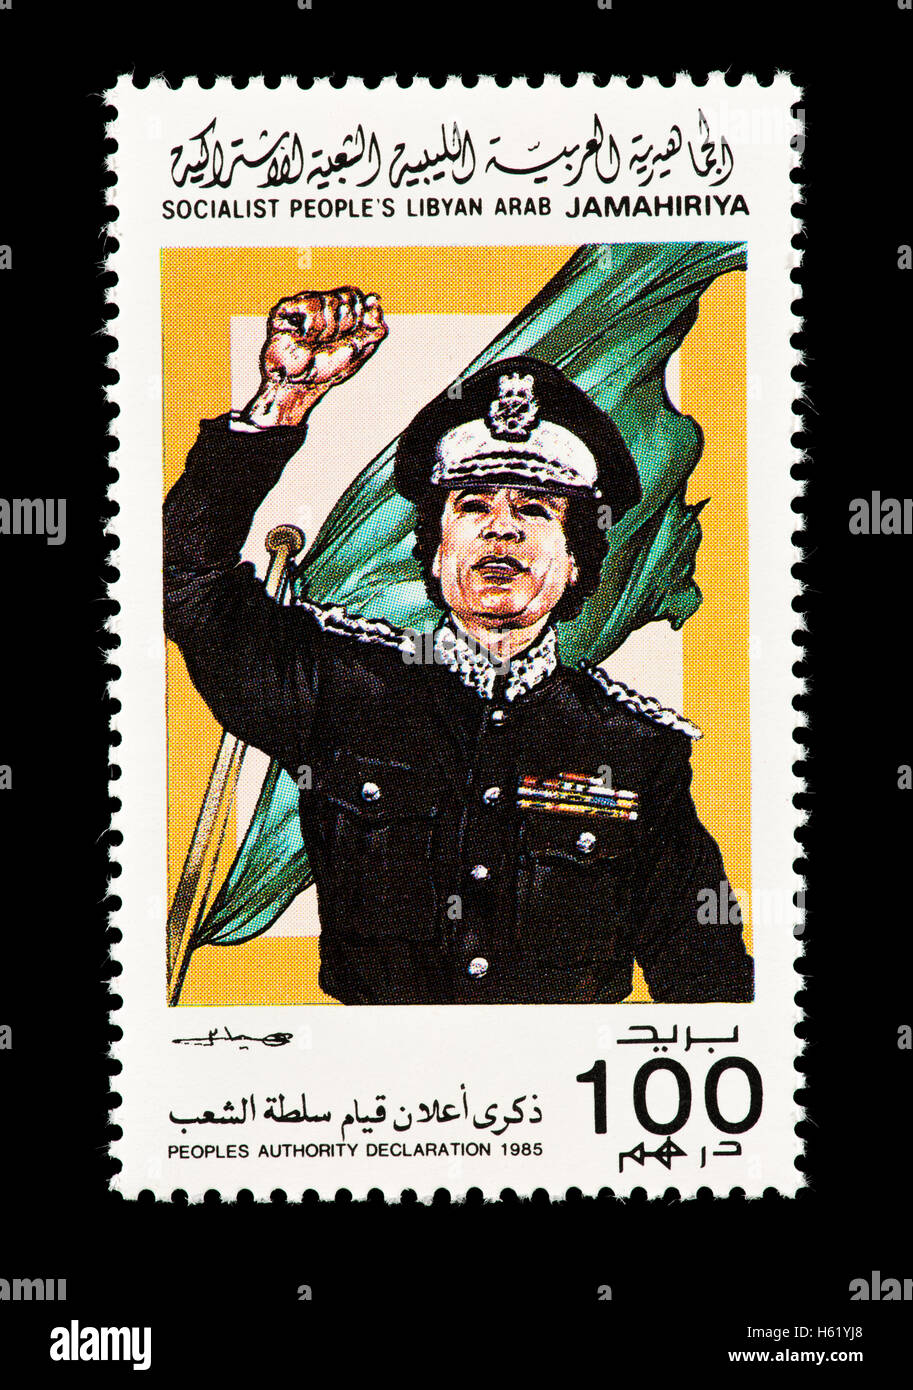 Postage stamp from Libya depicting Khadafy in a black uniform. Stock Photo